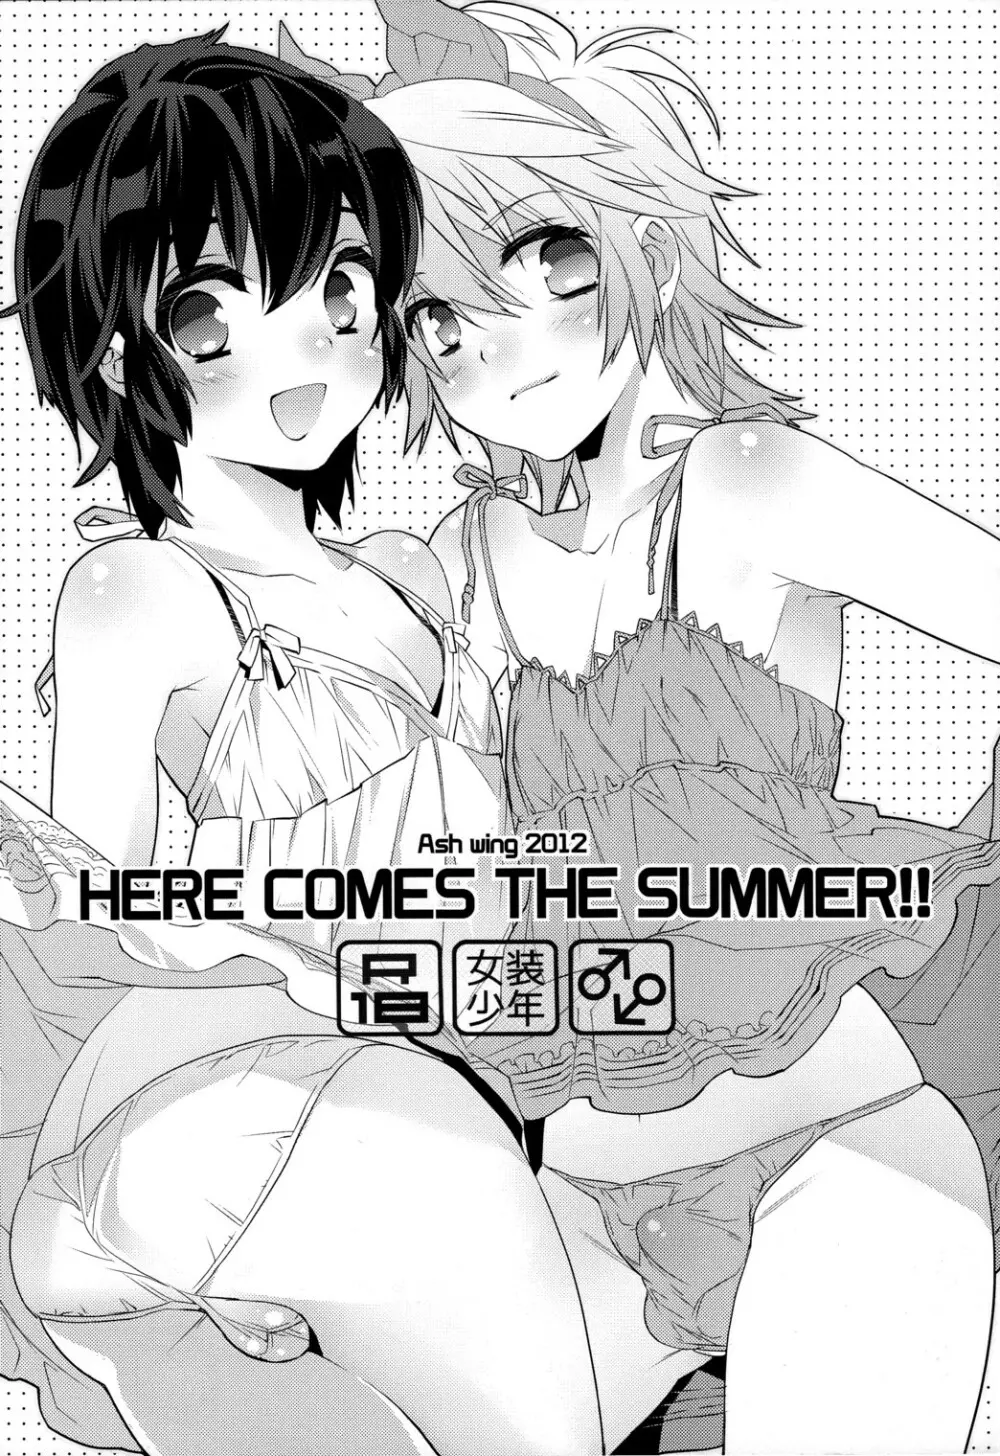 HERE COMES THE SUMMER!! - page1